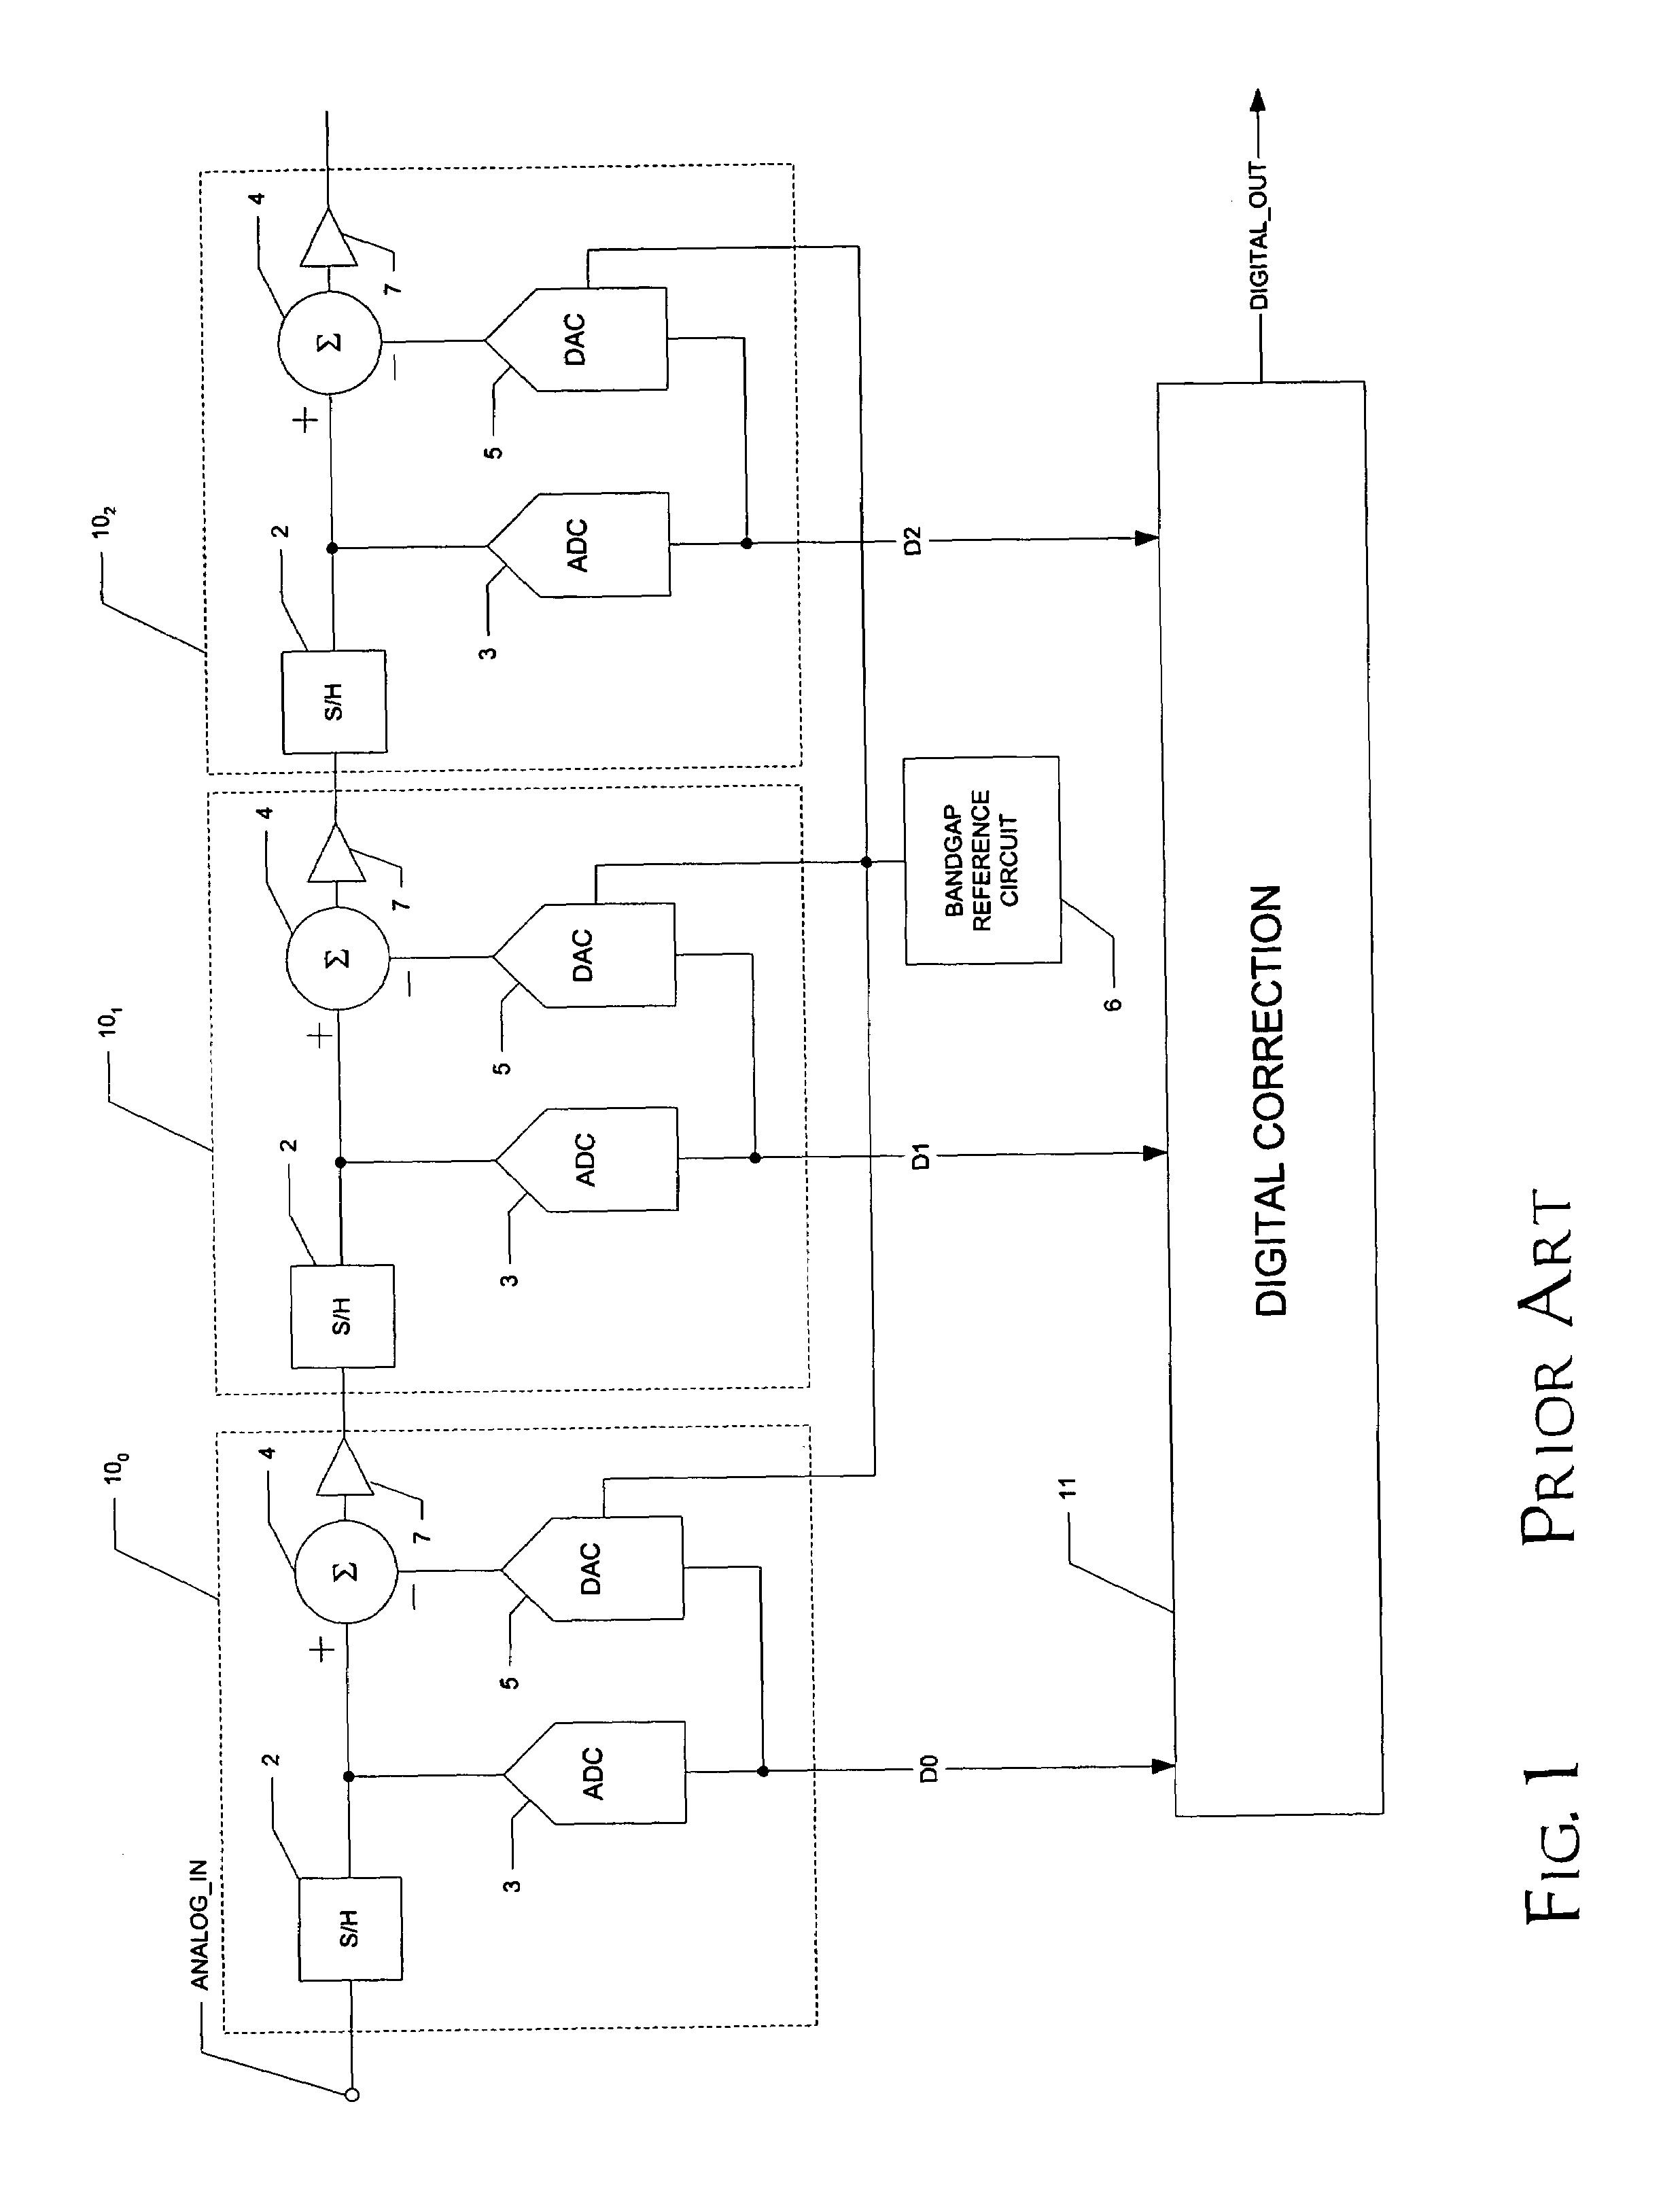 Switched-capacitor circuit with scaled reference voltage